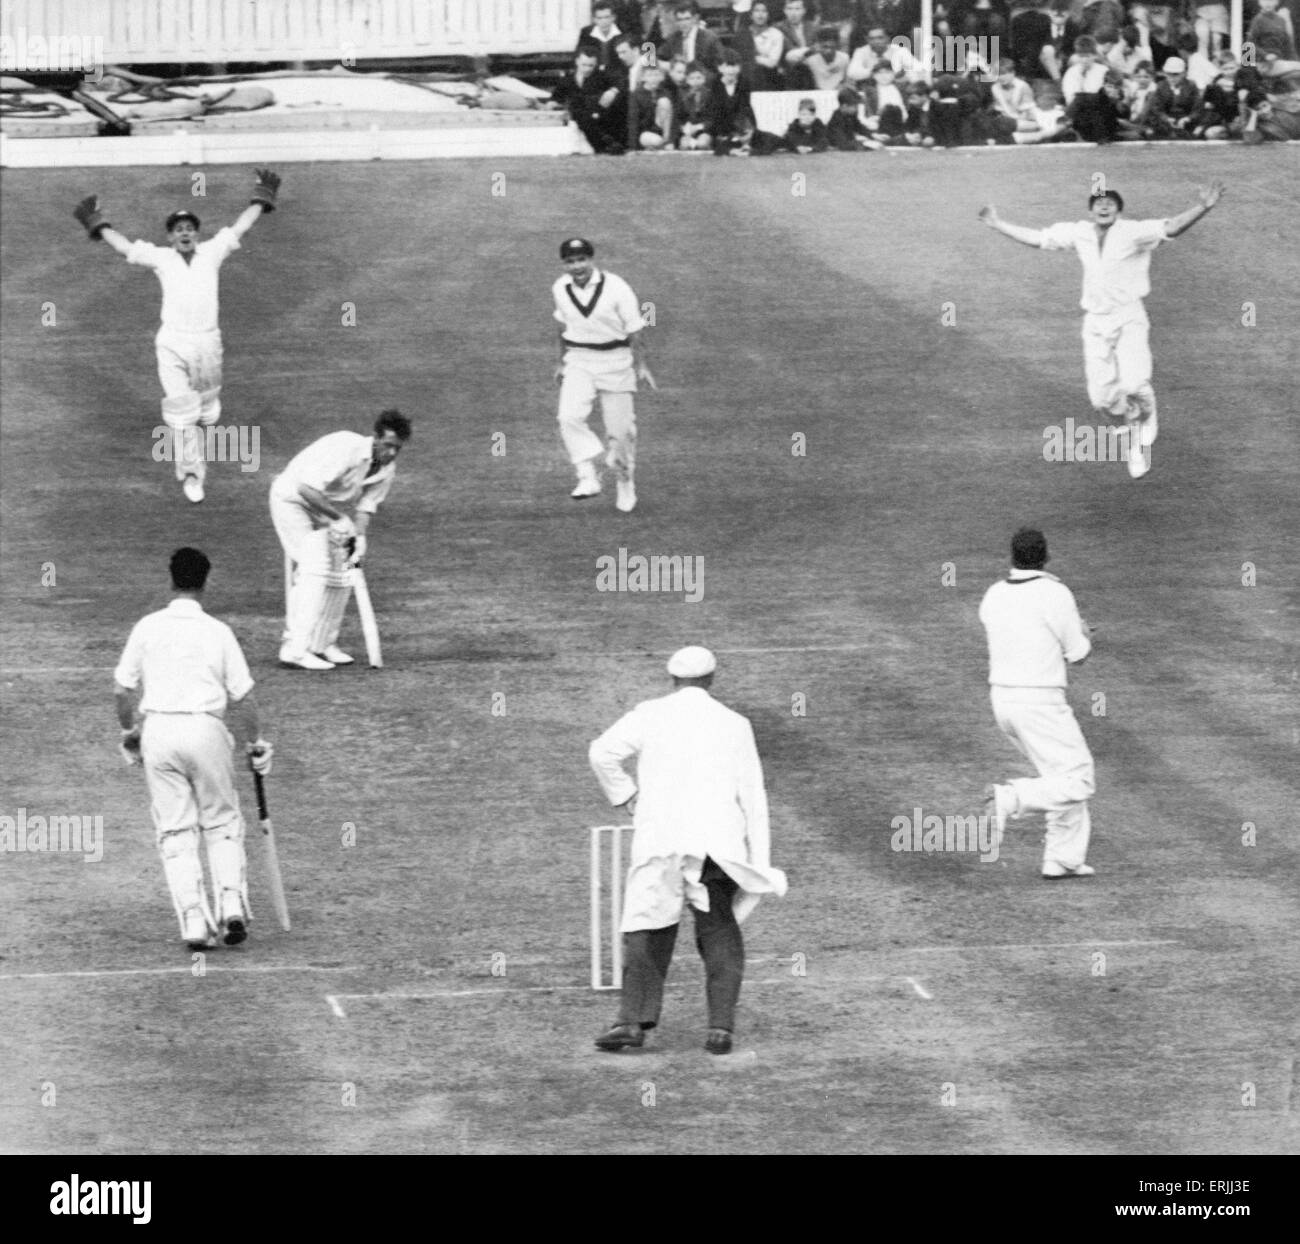 Australian cricket tour of England for the Ashes. England v Australia Fourth Test match at Old Trafford. A bail flies as Brian Statham's wicket is shattered by Alan Davidson and Australia have retained the Ashes with a dynamic 54 run win at Old Trafford. Stock Photo